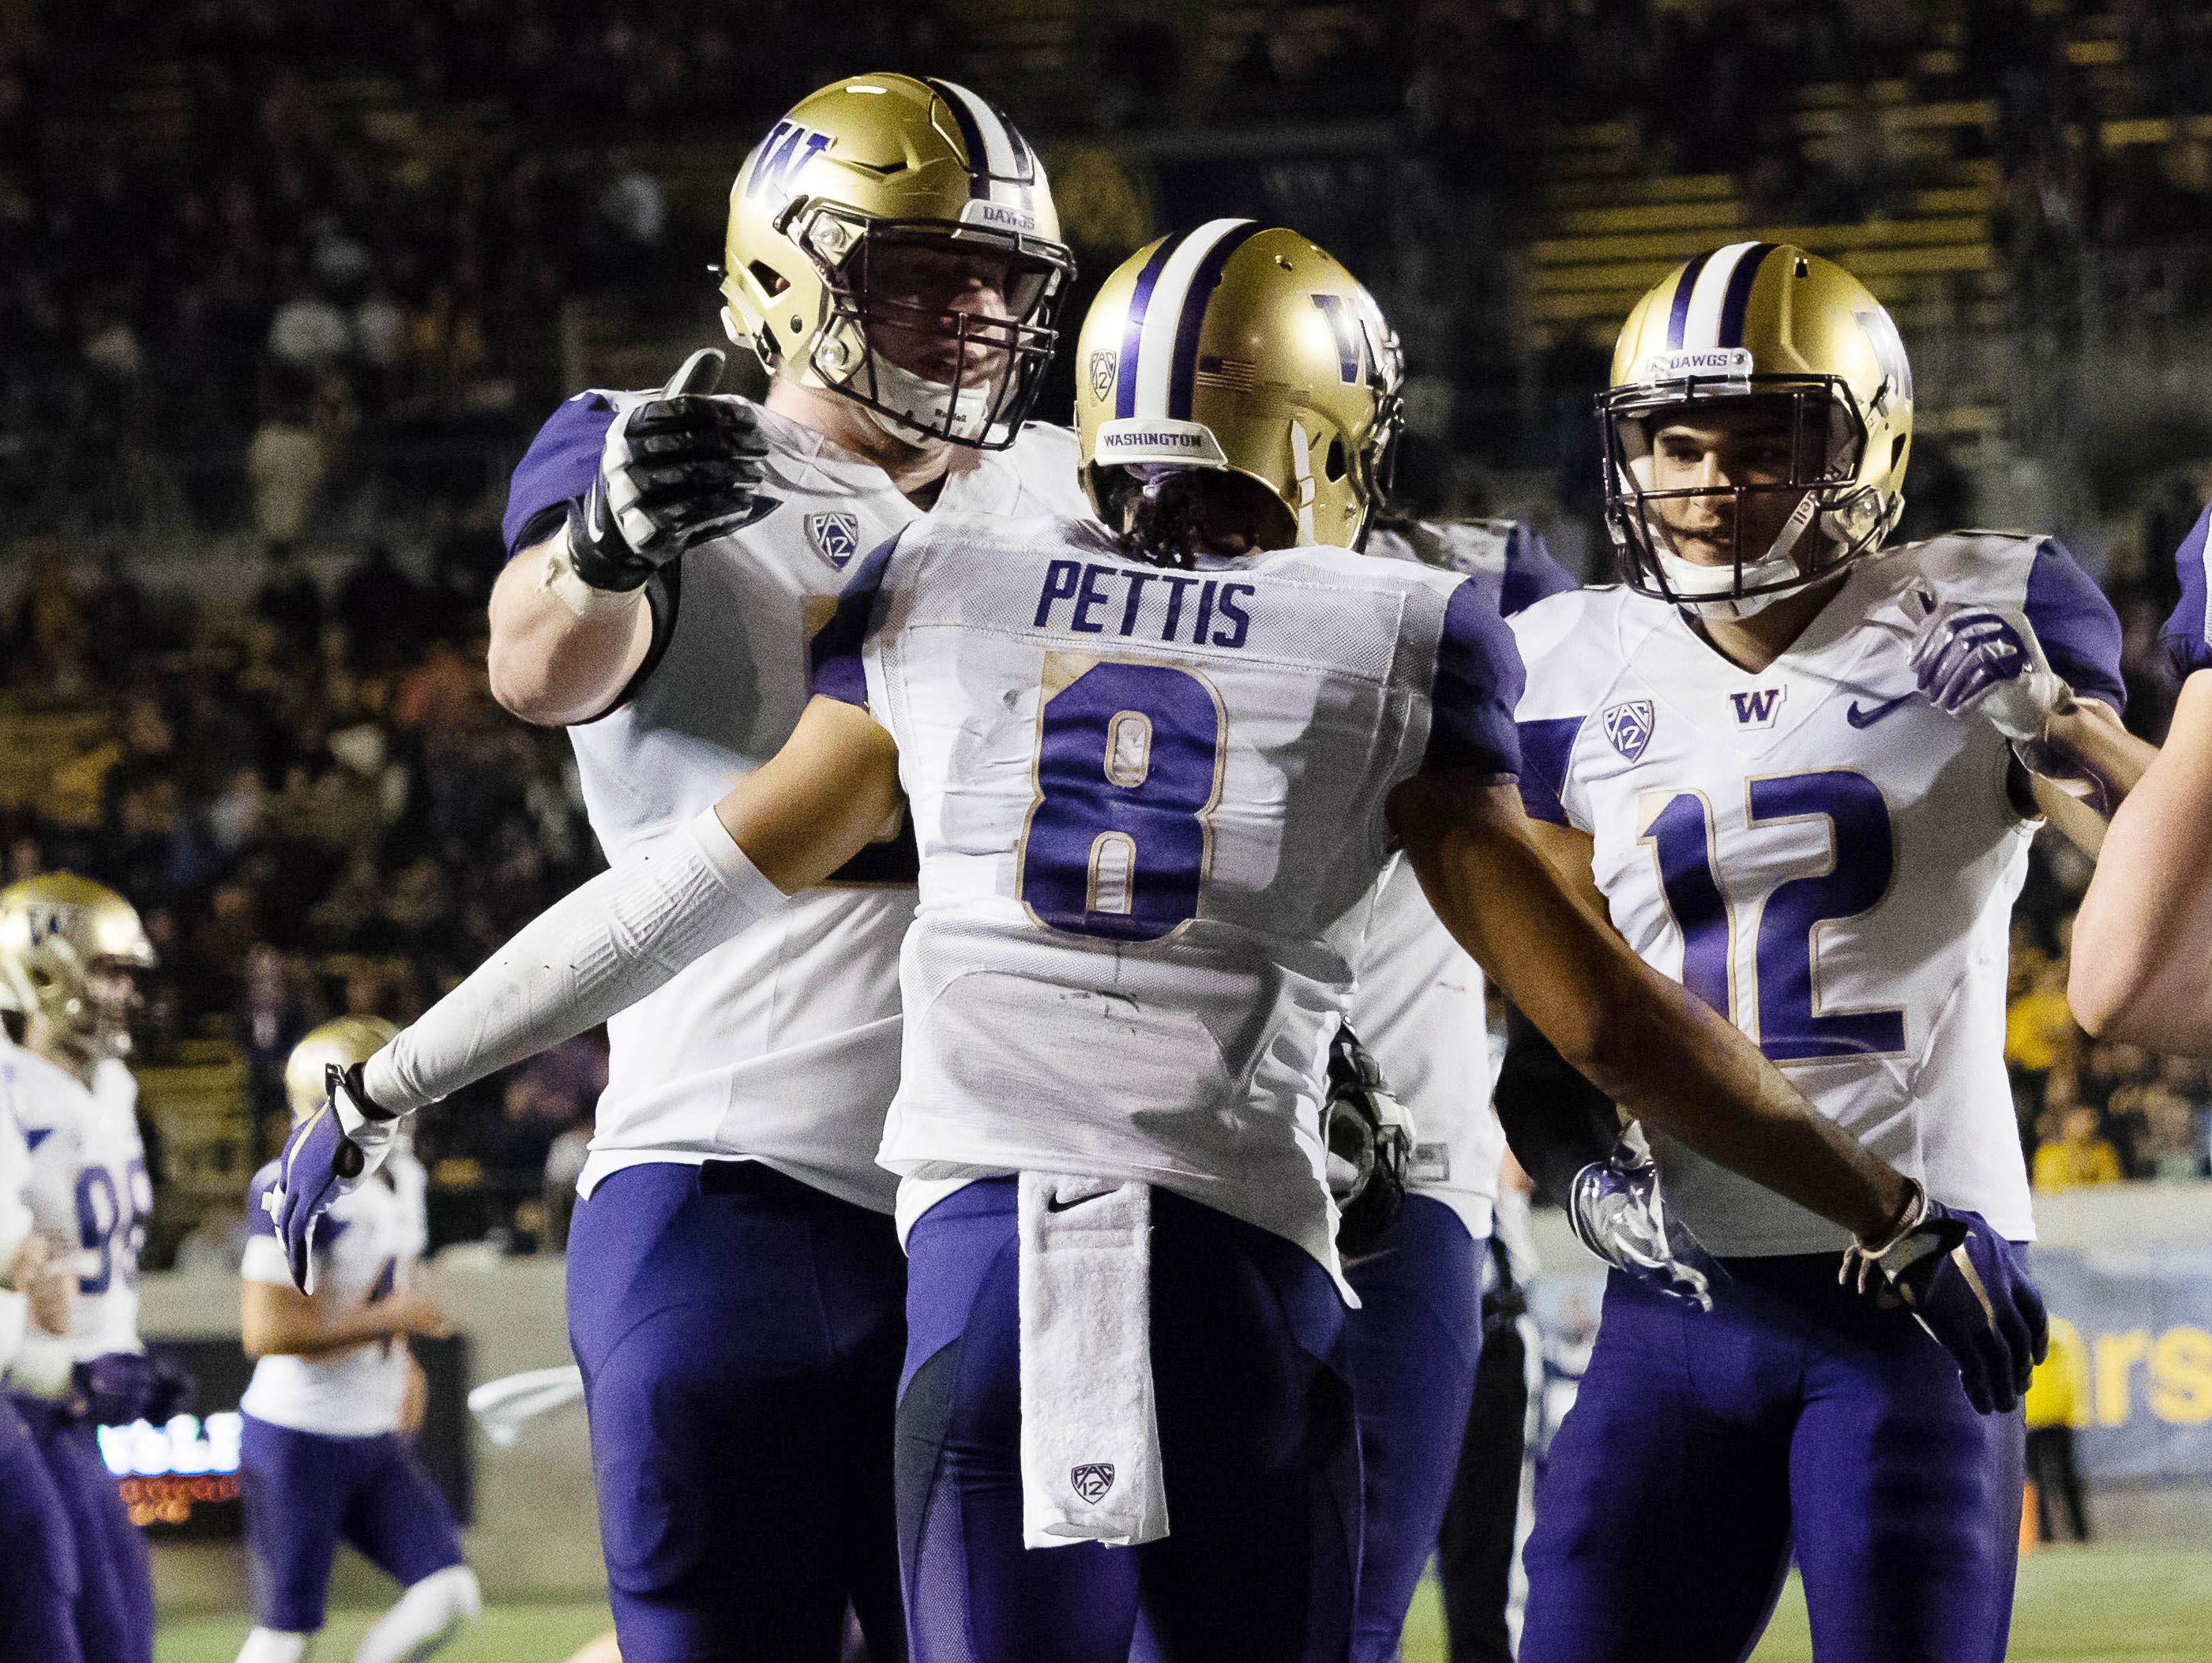 Washington cracks top four in College Football Playoff top 25 rankings